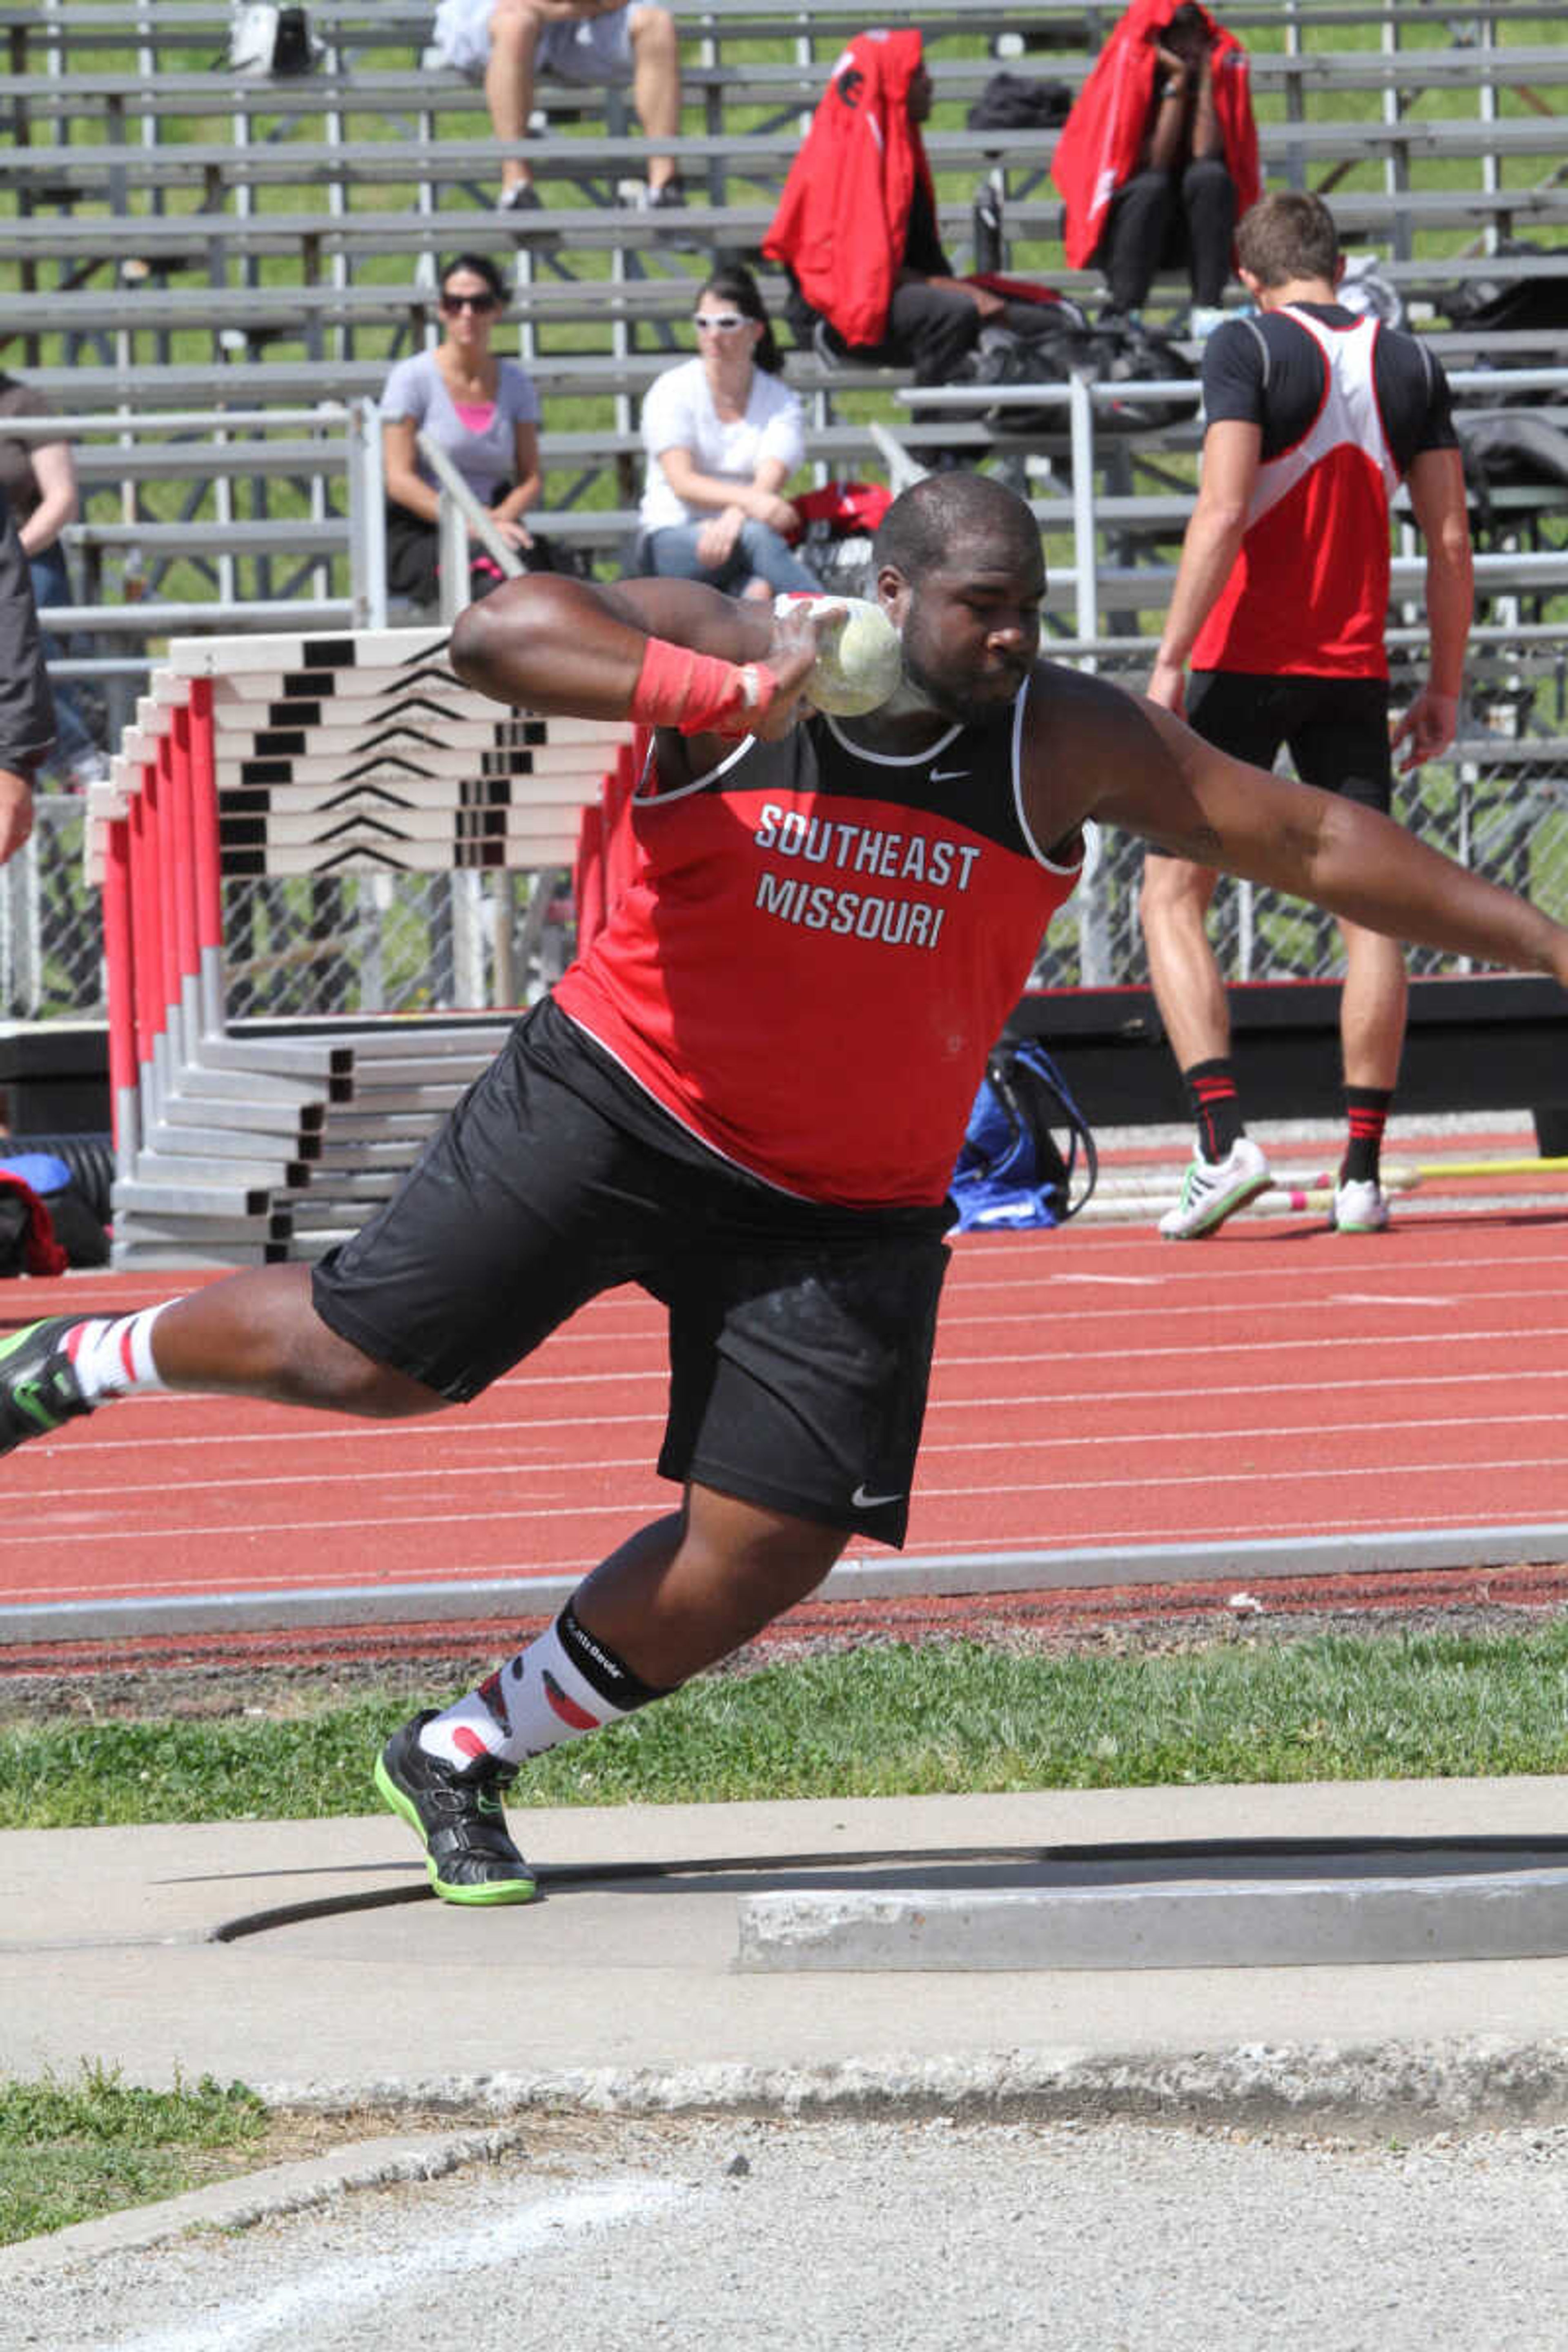 Craig Robinson throws a shot put at the Joey Haines Invitational at the Abe Stuber Track and Field Complex. - Submitted photo